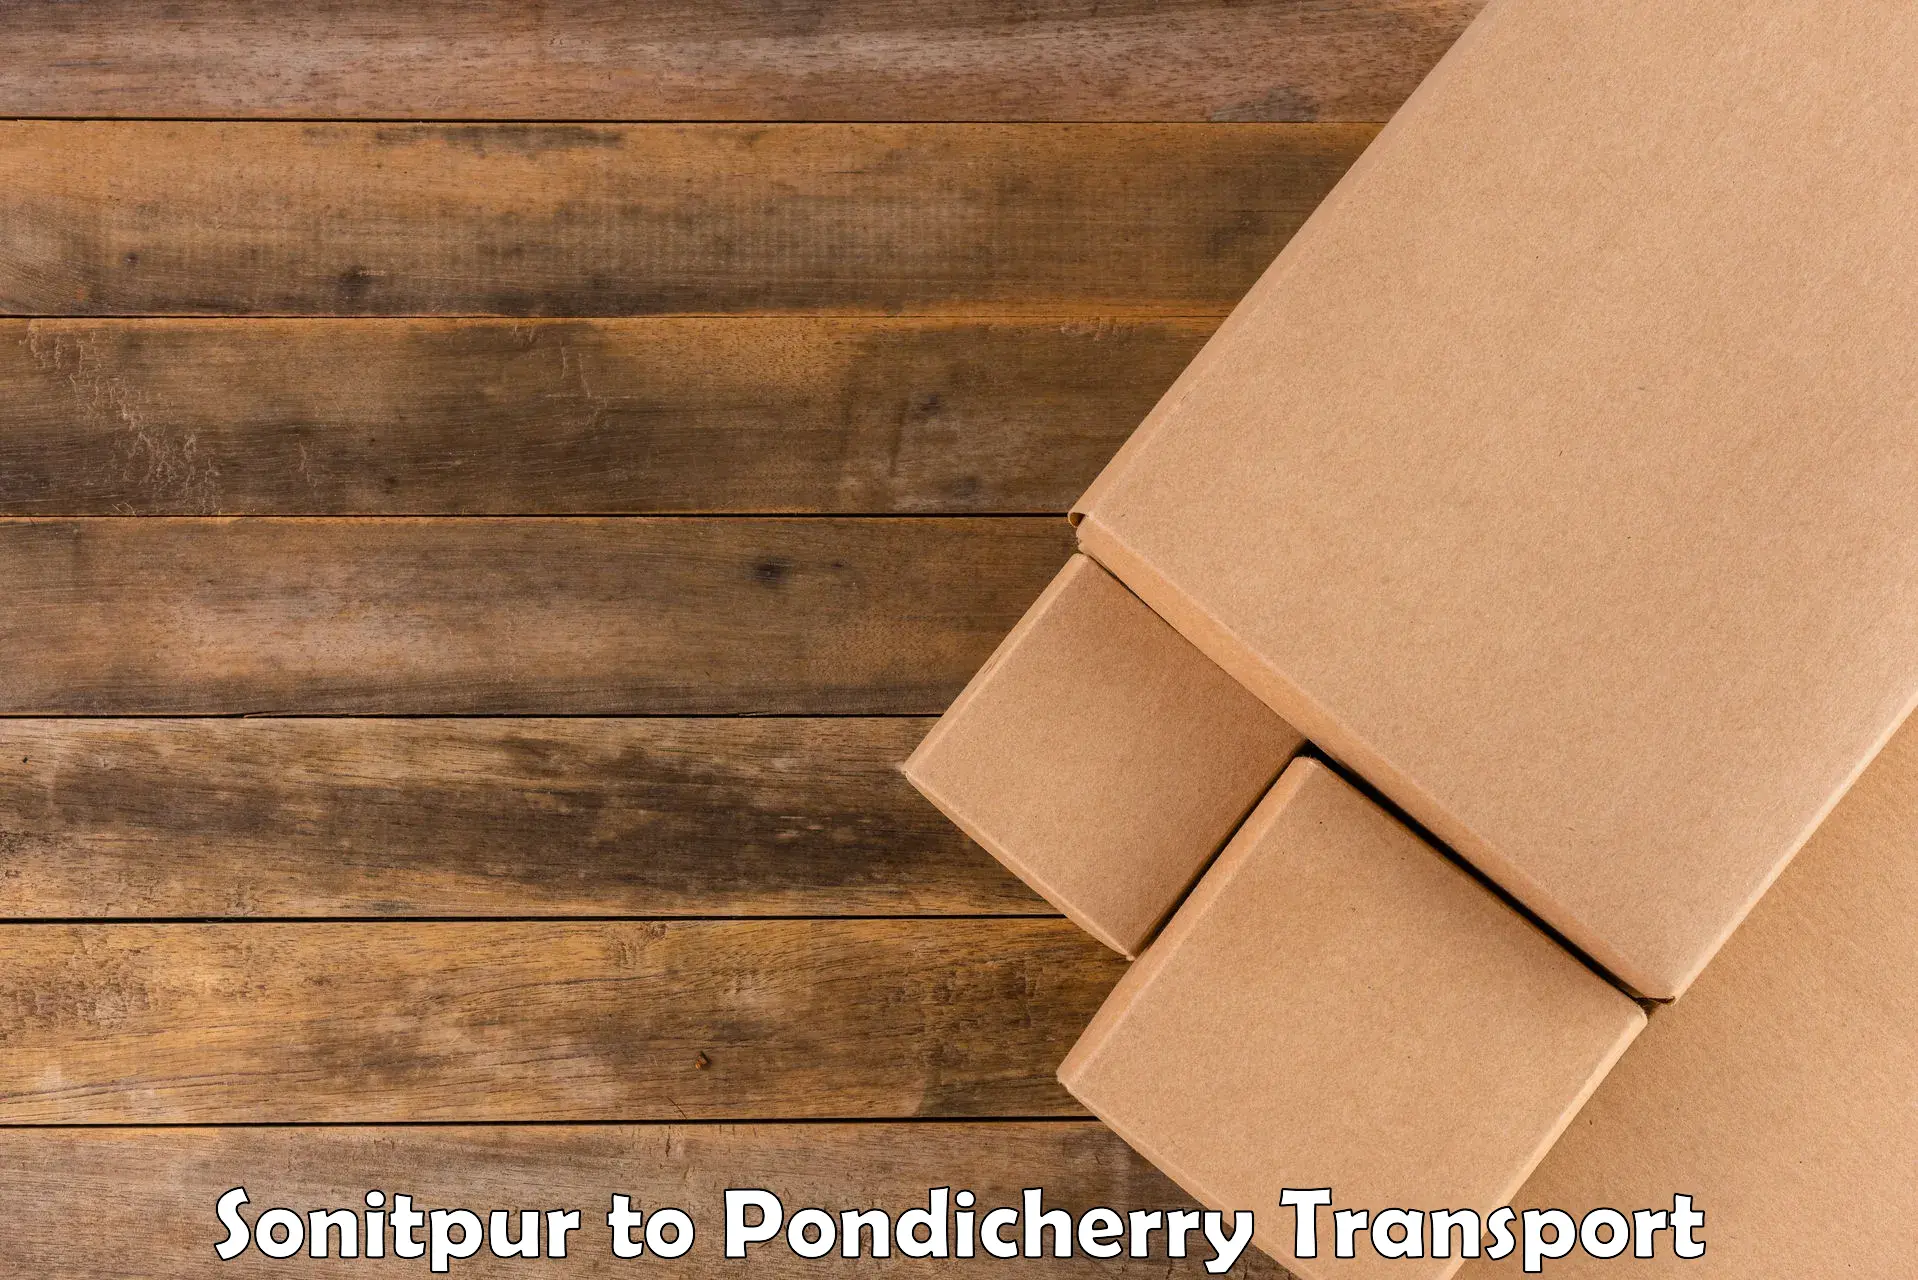 Daily parcel service transport Sonitpur to Pondicherry